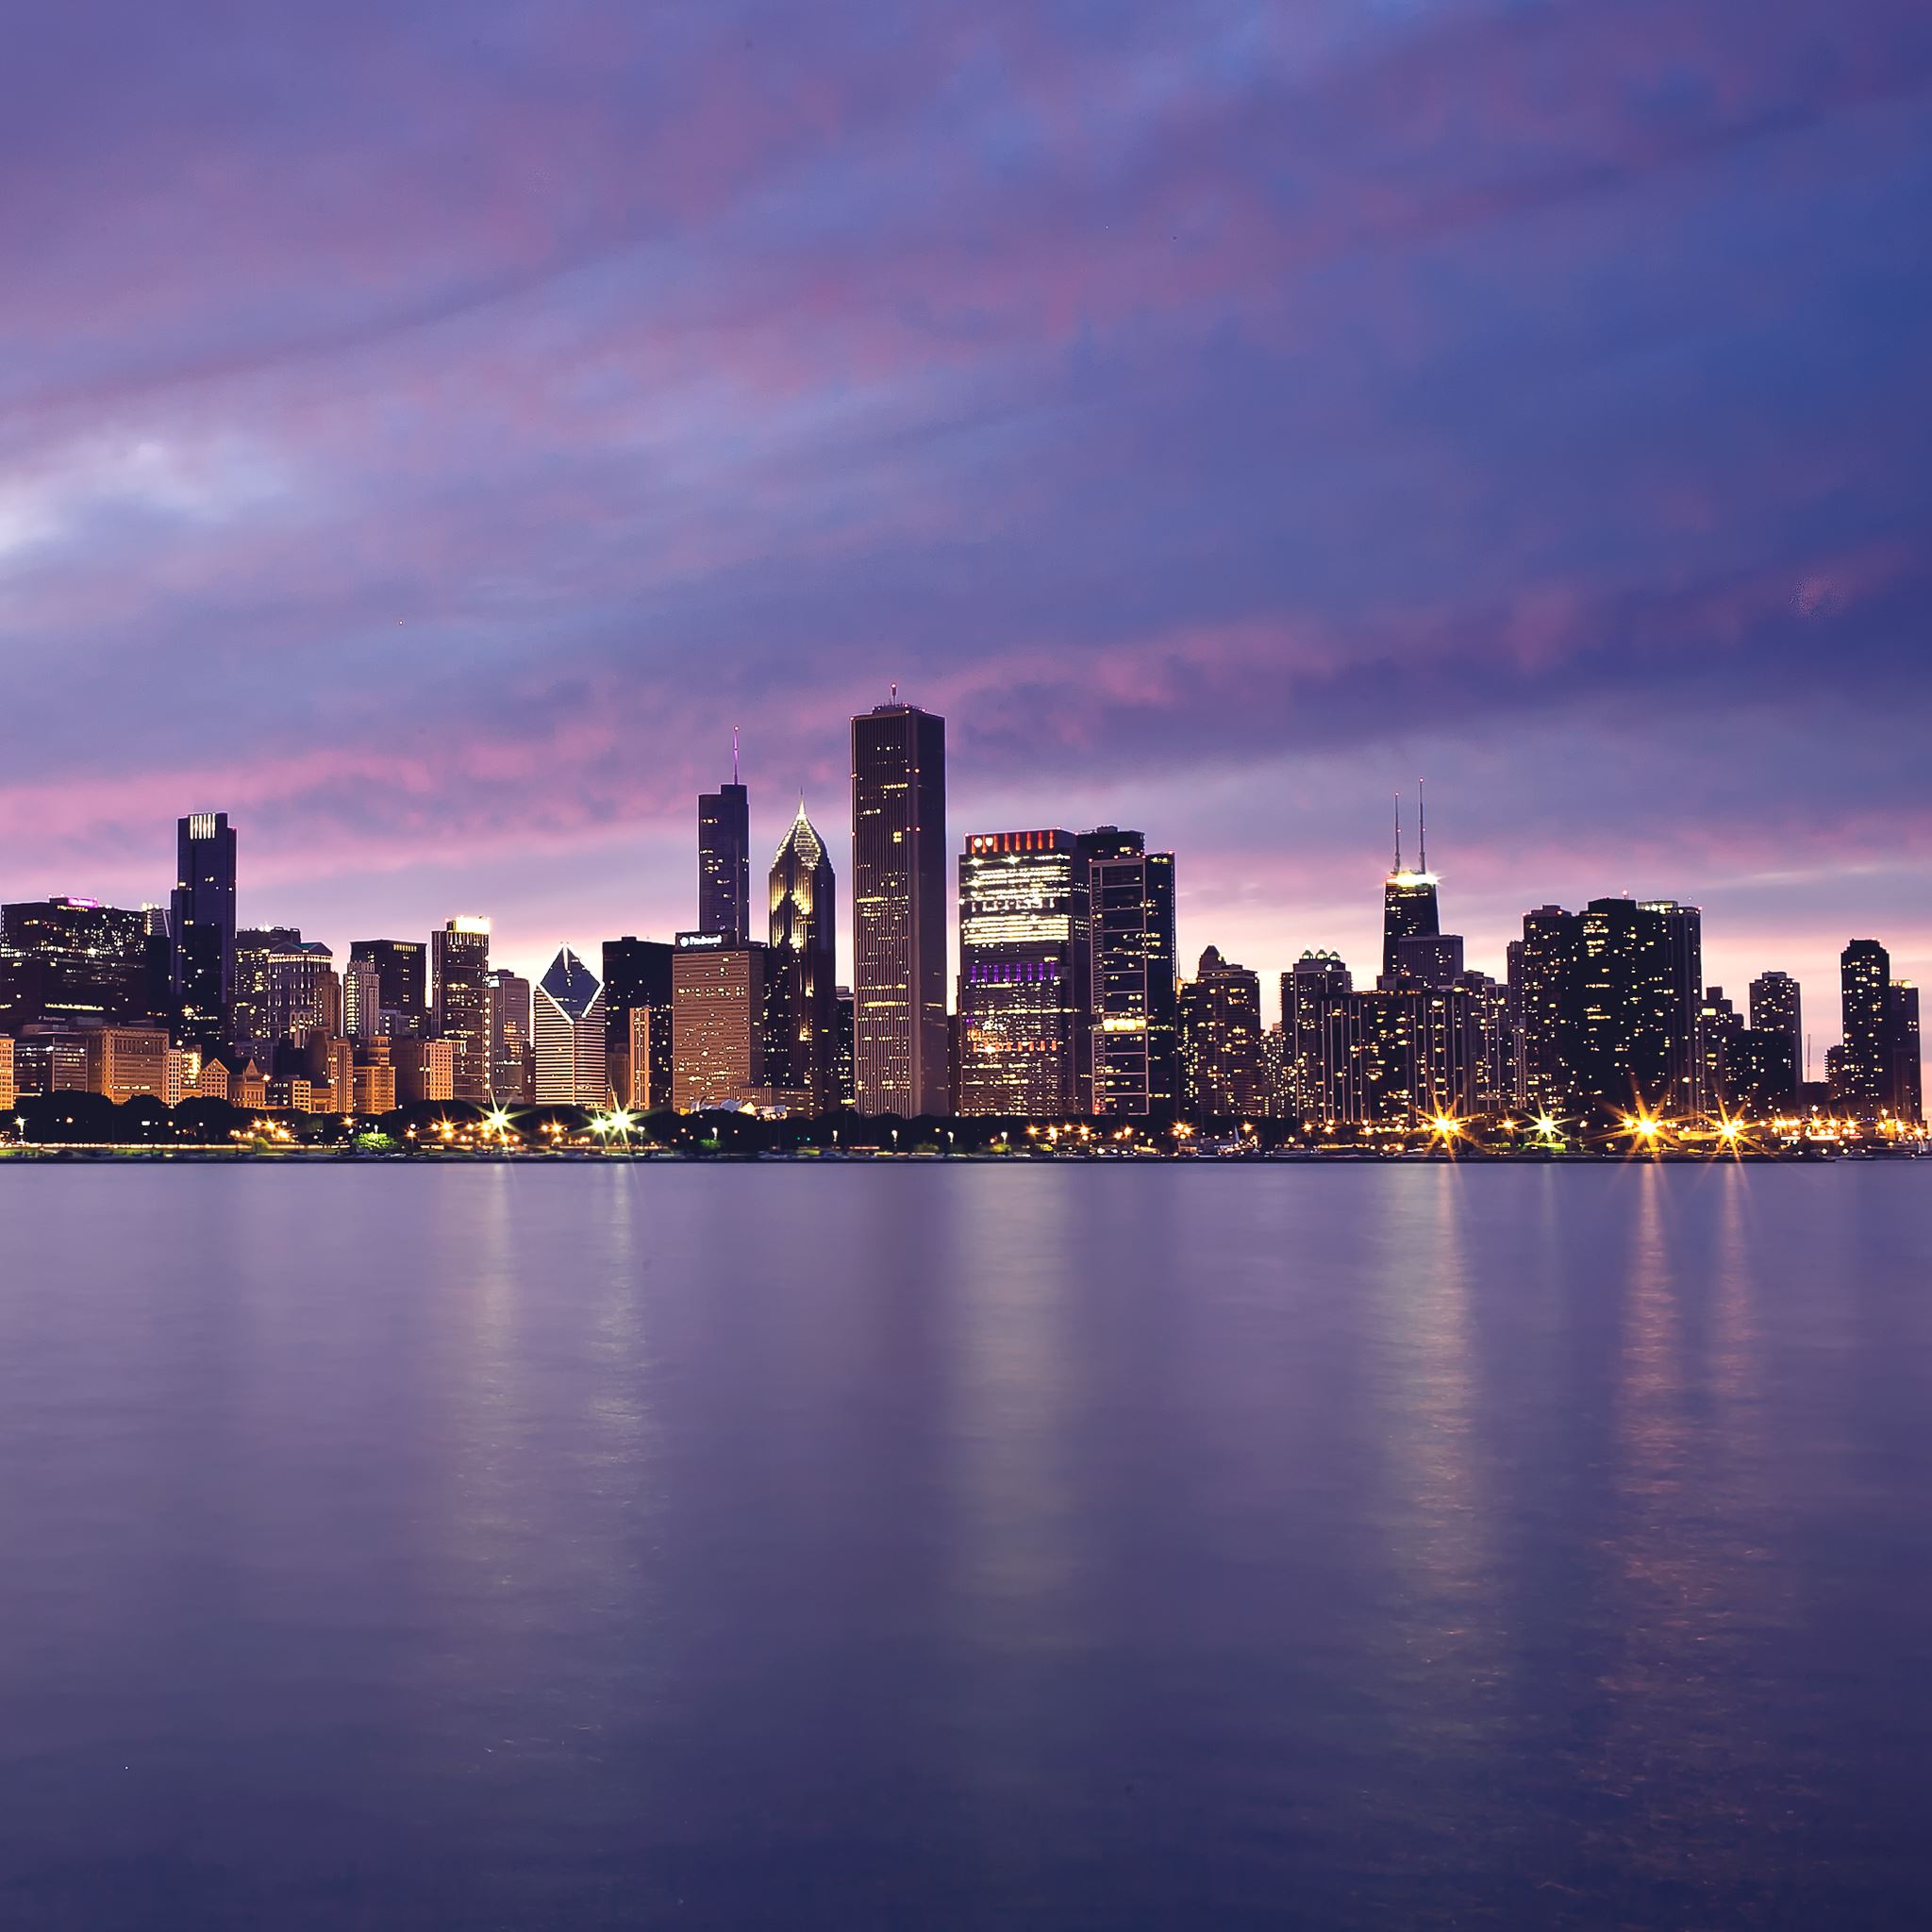 Sunset in the Windy City iPad Air wallpaper 